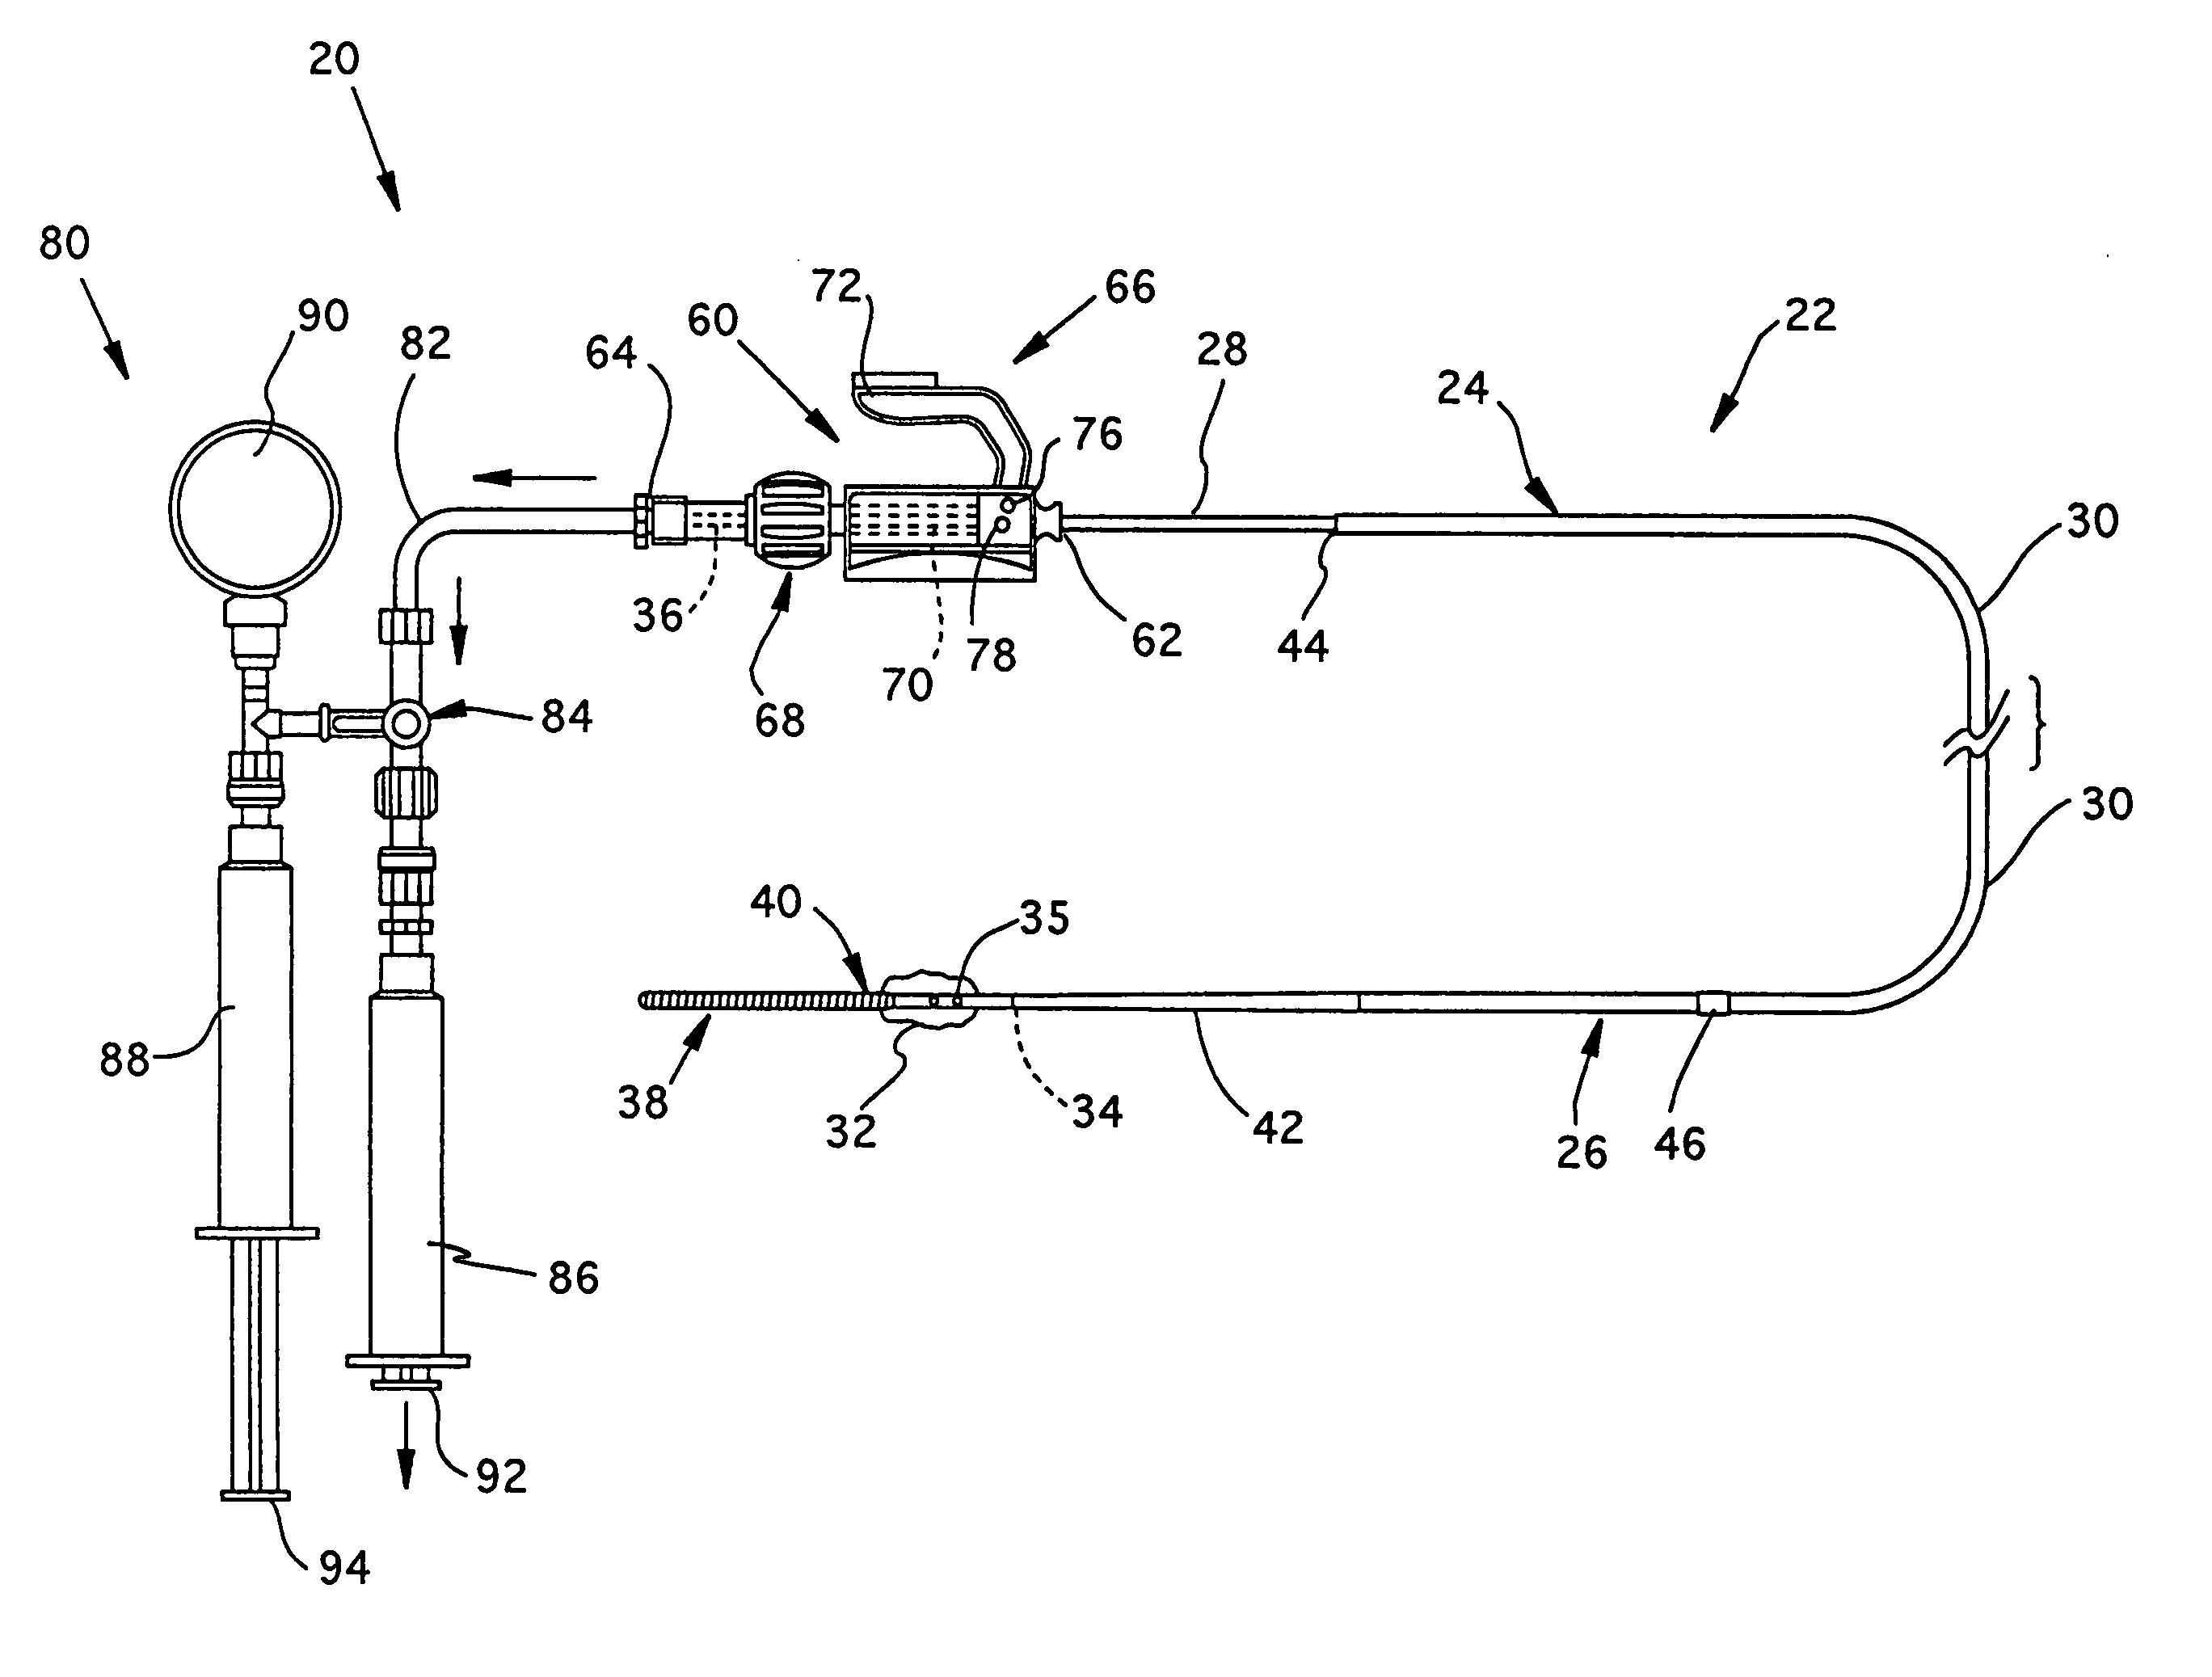 Guidewire having occlusive device and repeatably crimpable proximal end